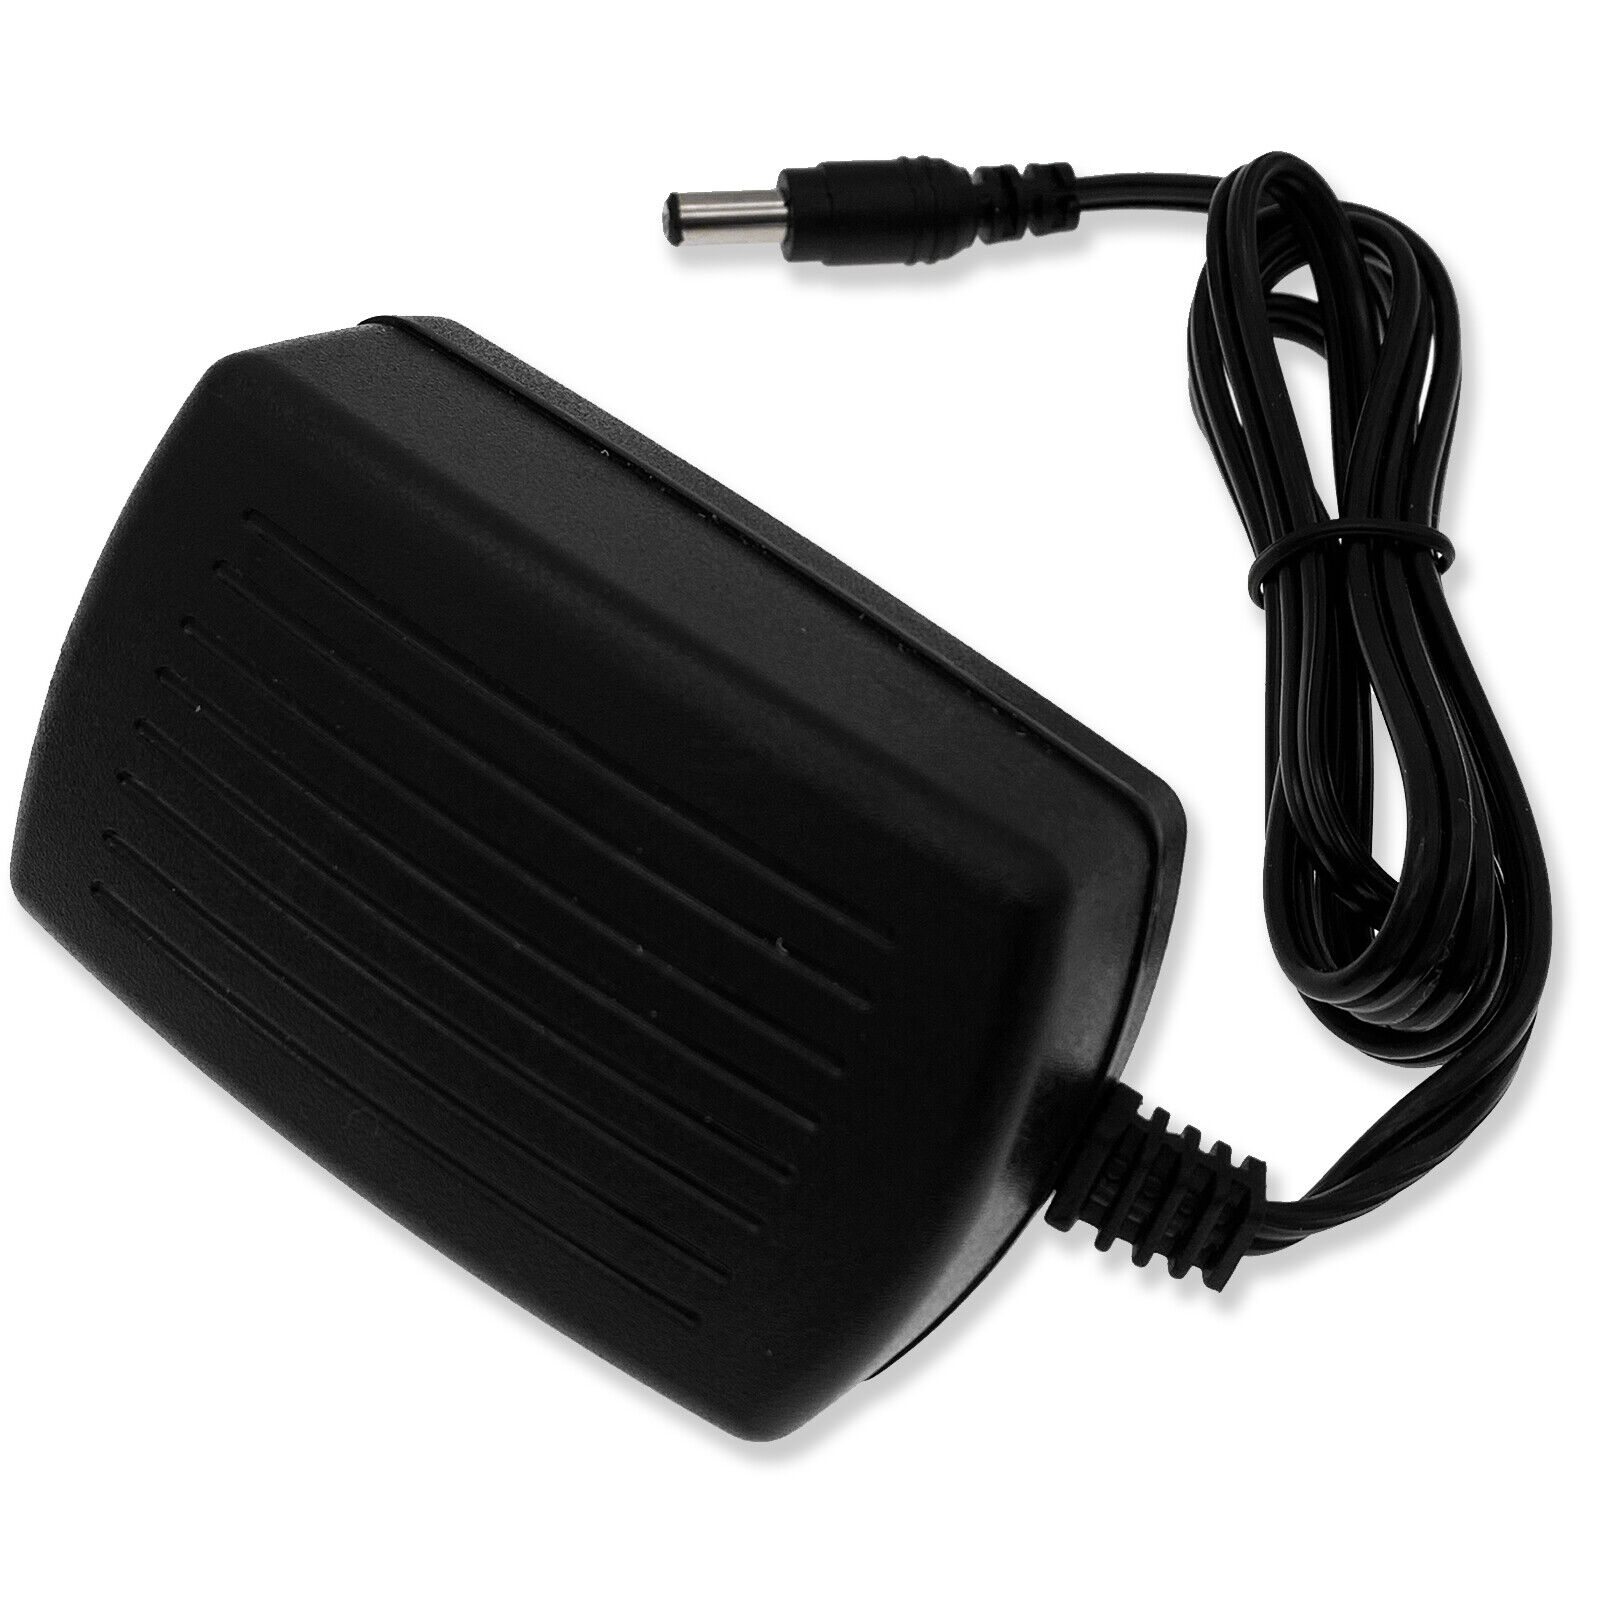 *Brand NEW*DELL WYSE 3040 Thin Client Power Supply Cord Charger 5V 3A AC Adapter - Click Image to Close